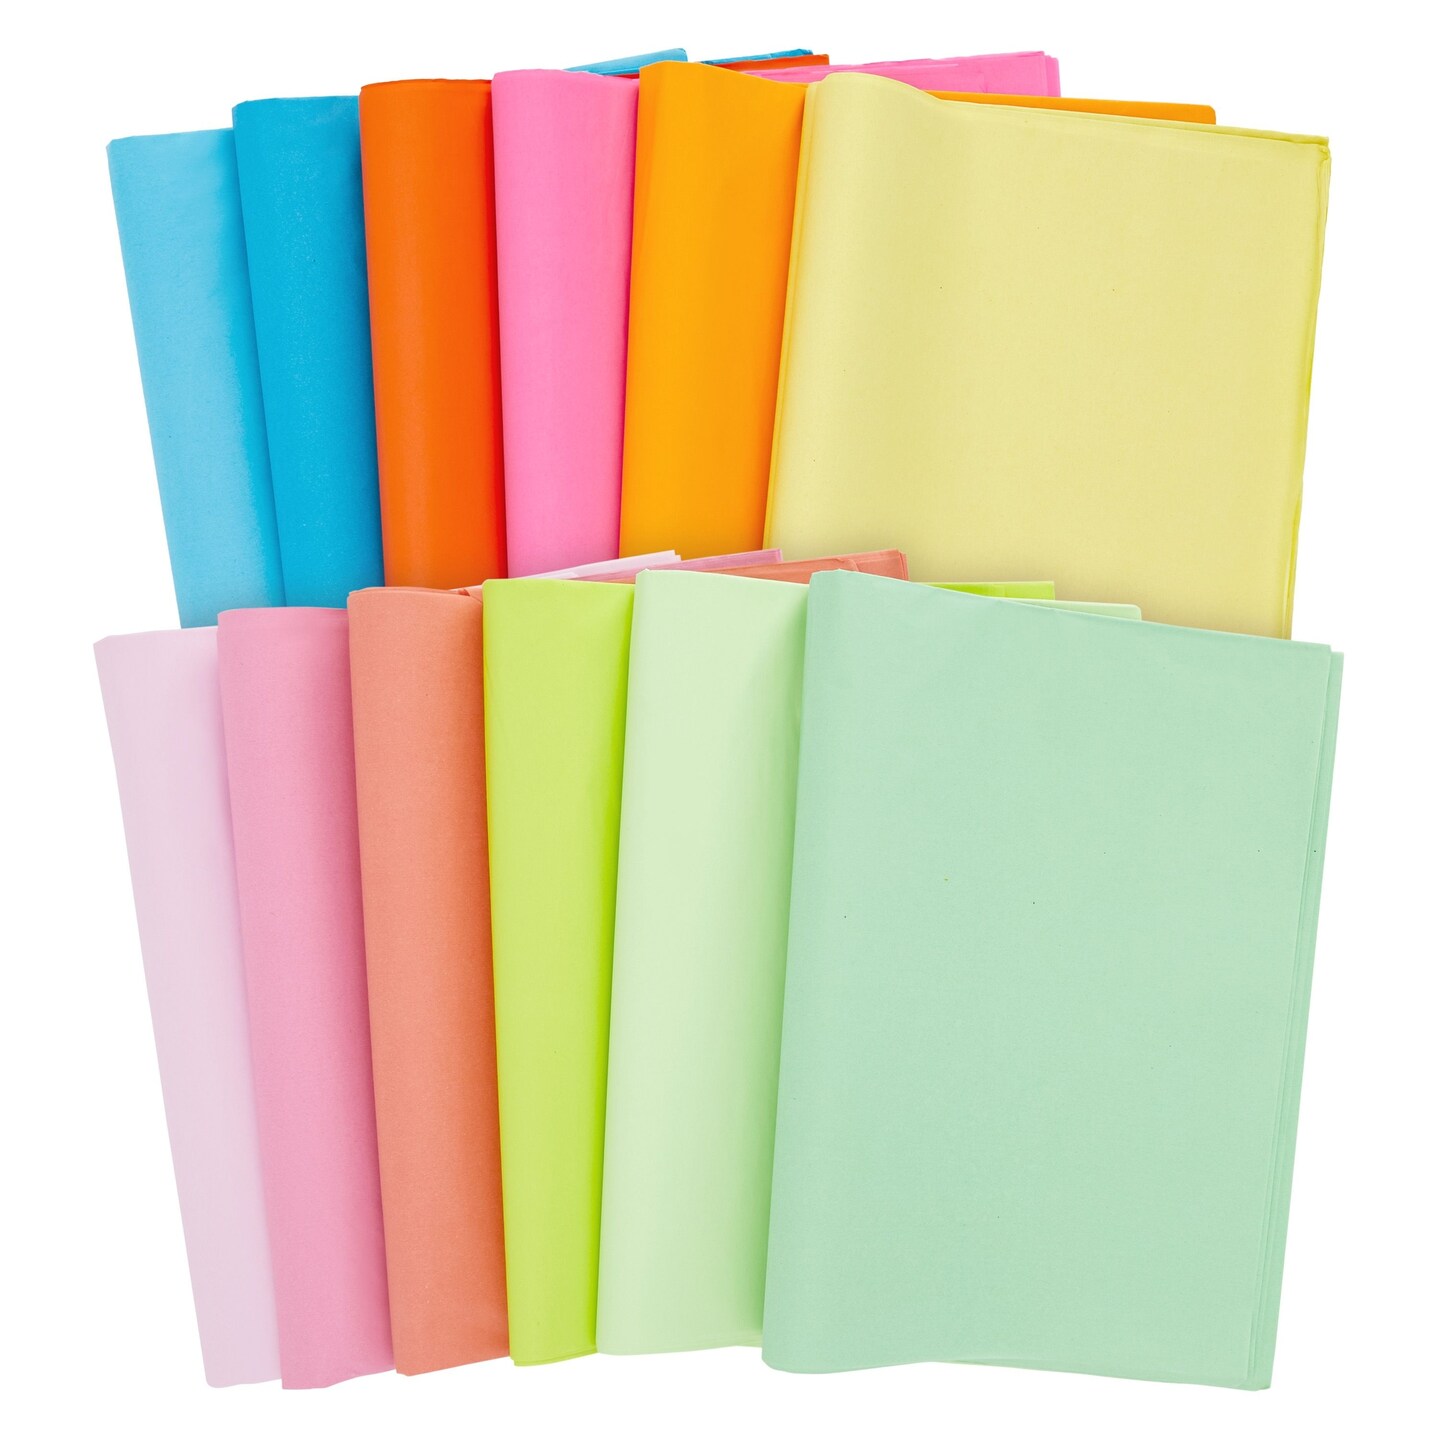 180 Sheets Rainbow Tissue Paper for Gift Wrapping Bags for Holidays, Art  Crafts, 12 Assorted Colors, 20 x 26 Inches